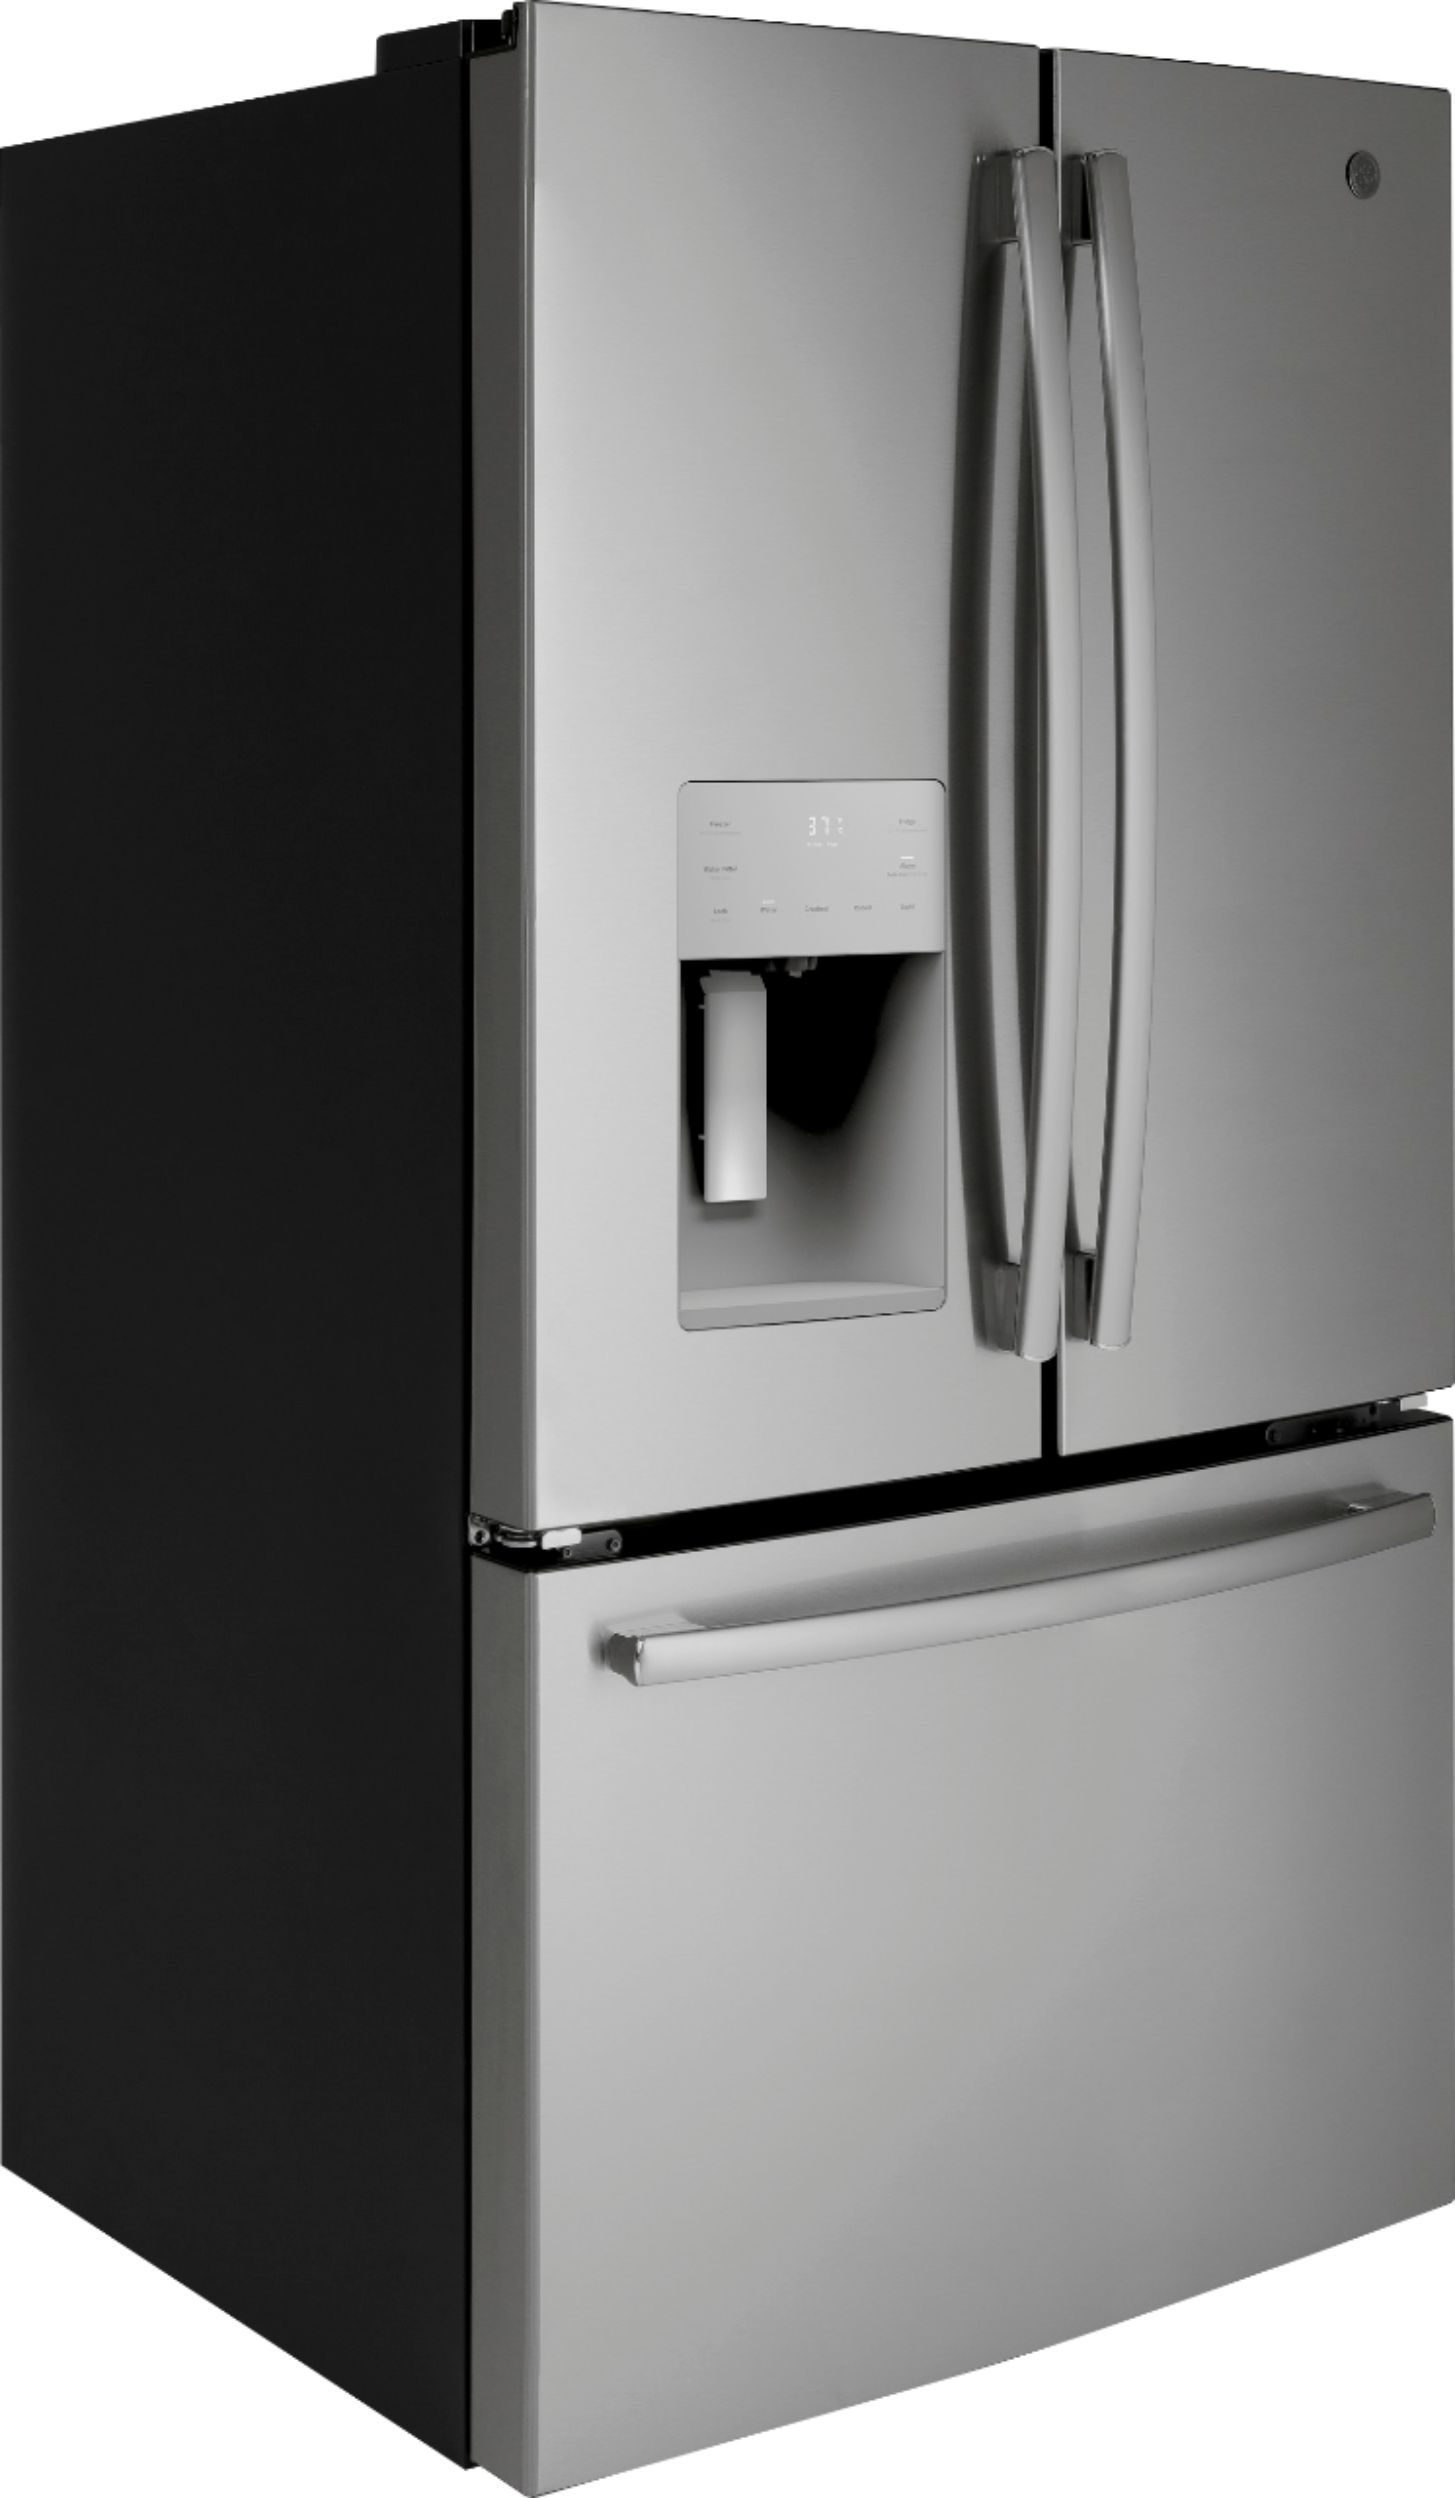 Angle View: GE - 25 Cu. Ft. French Door Refrigerator - Black stainless steel